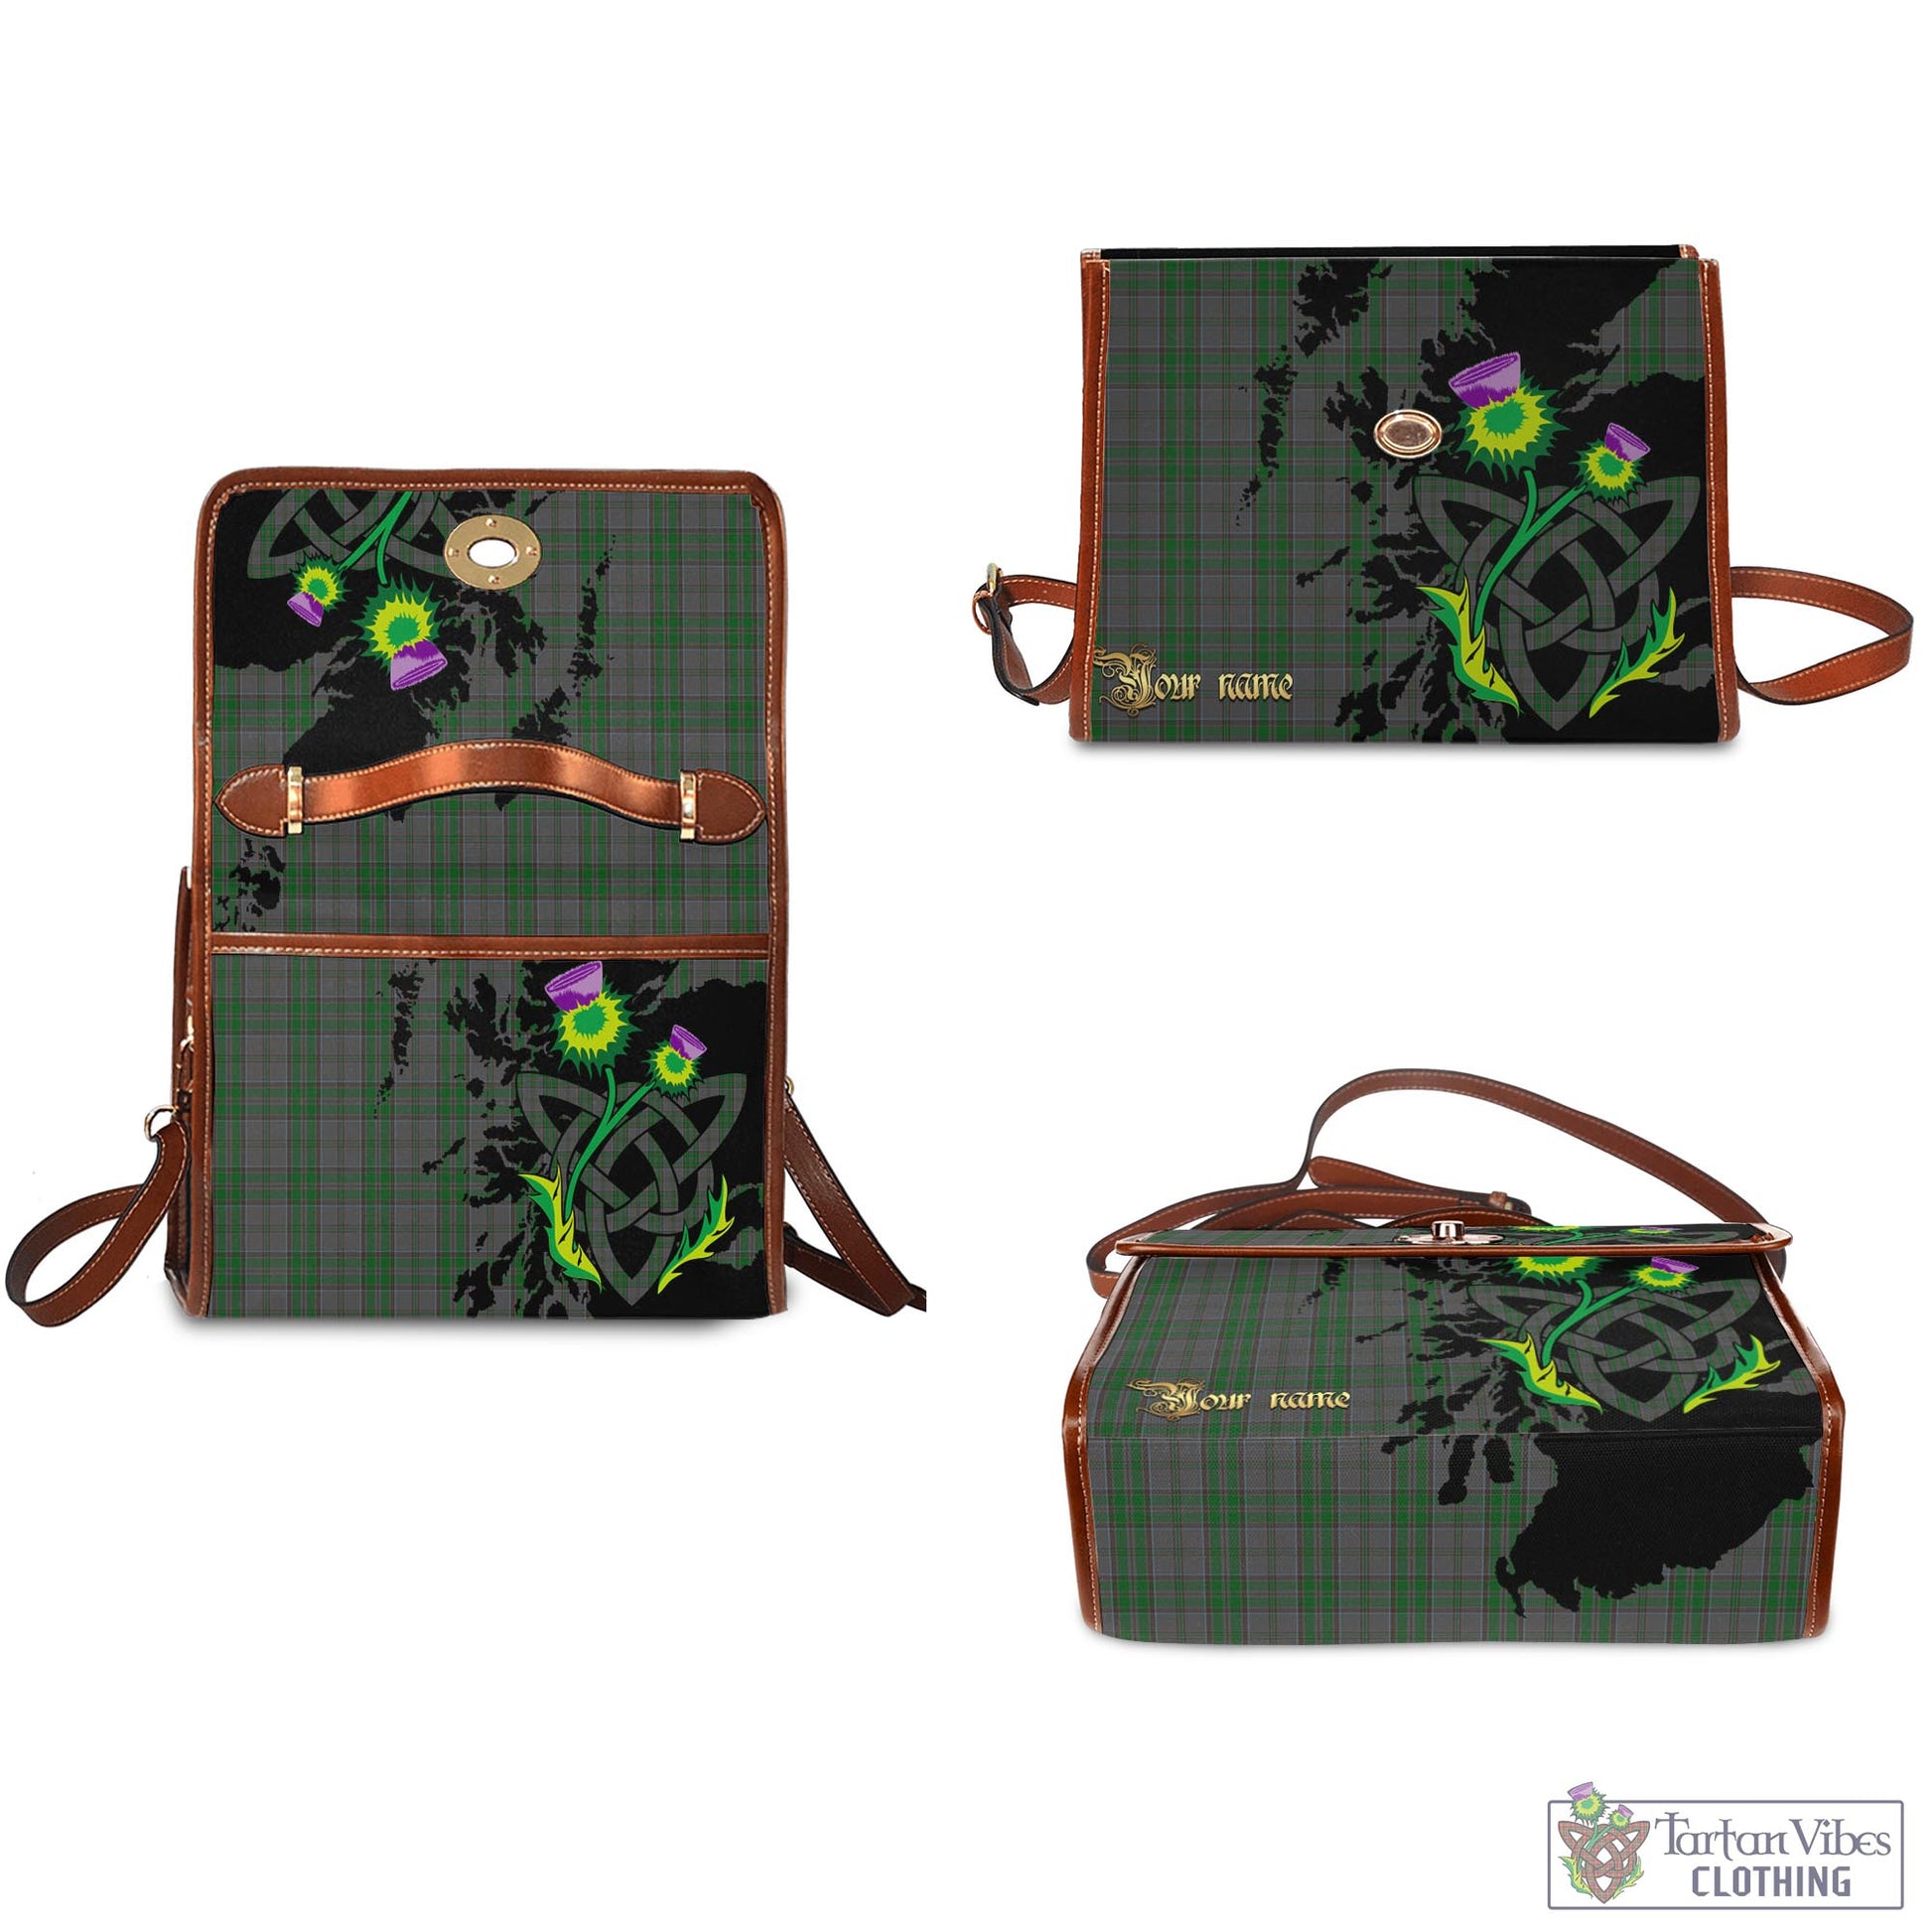 Tartan Vibes Clothing Wicklow County Ireland Tartan Waterproof Canvas Bag with Scotland Map and Thistle Celtic Accents